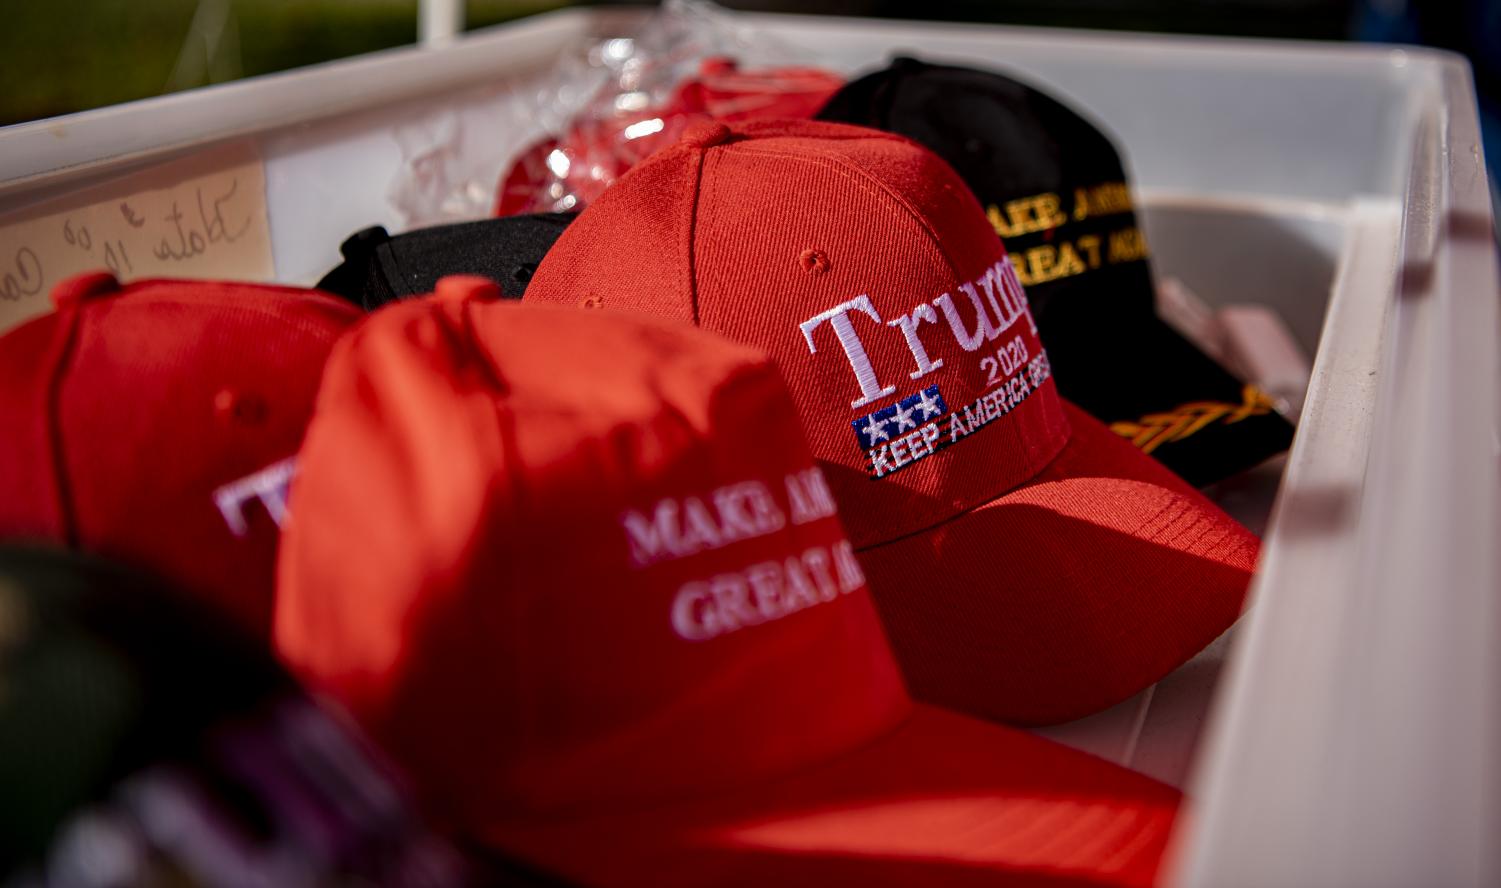 Trump hats sit in a bin at Doris Millers Trump merchandise stand in Vienna, Ill. An avid Trump supporter, Miller sells Trump merchandise to raise profits for Trump. We don’t even take our lunch money out of that, because we want every cent to go to Trump, Miller said Saturday, Oct. 17, 2020. 